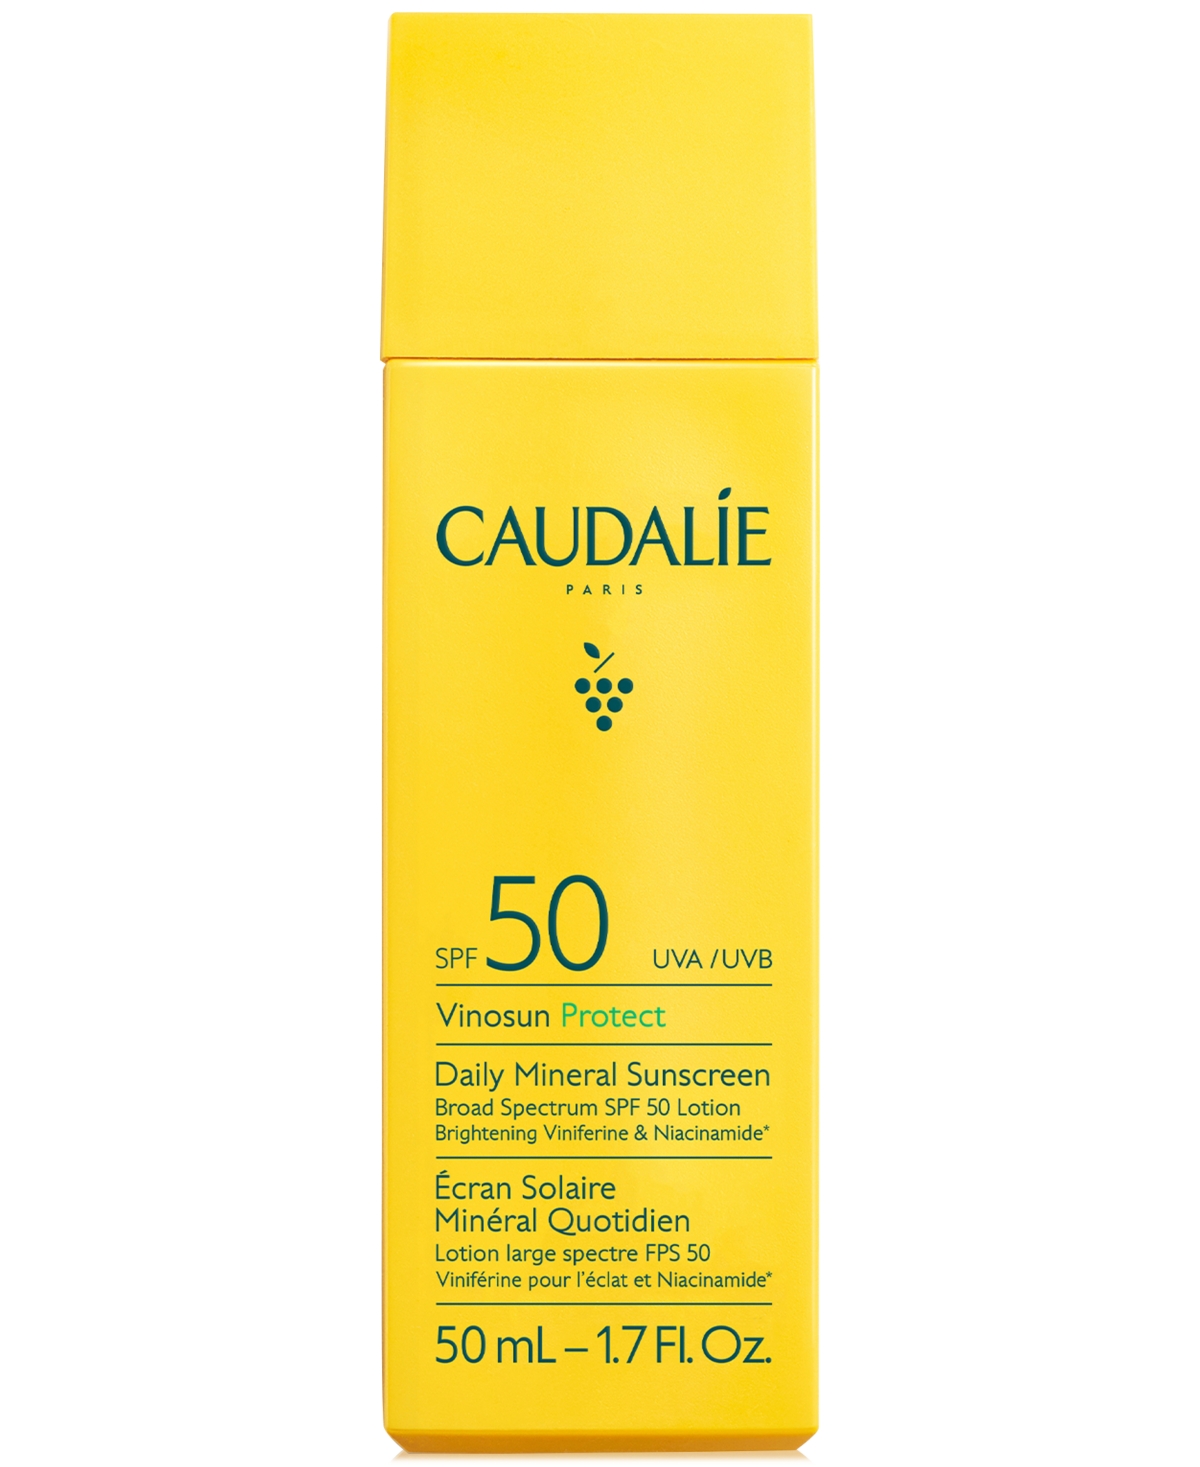 Caudalíe Vinosun Protect Daily Mineral Sunscreen Spf 50, 1.7 Oz. In White